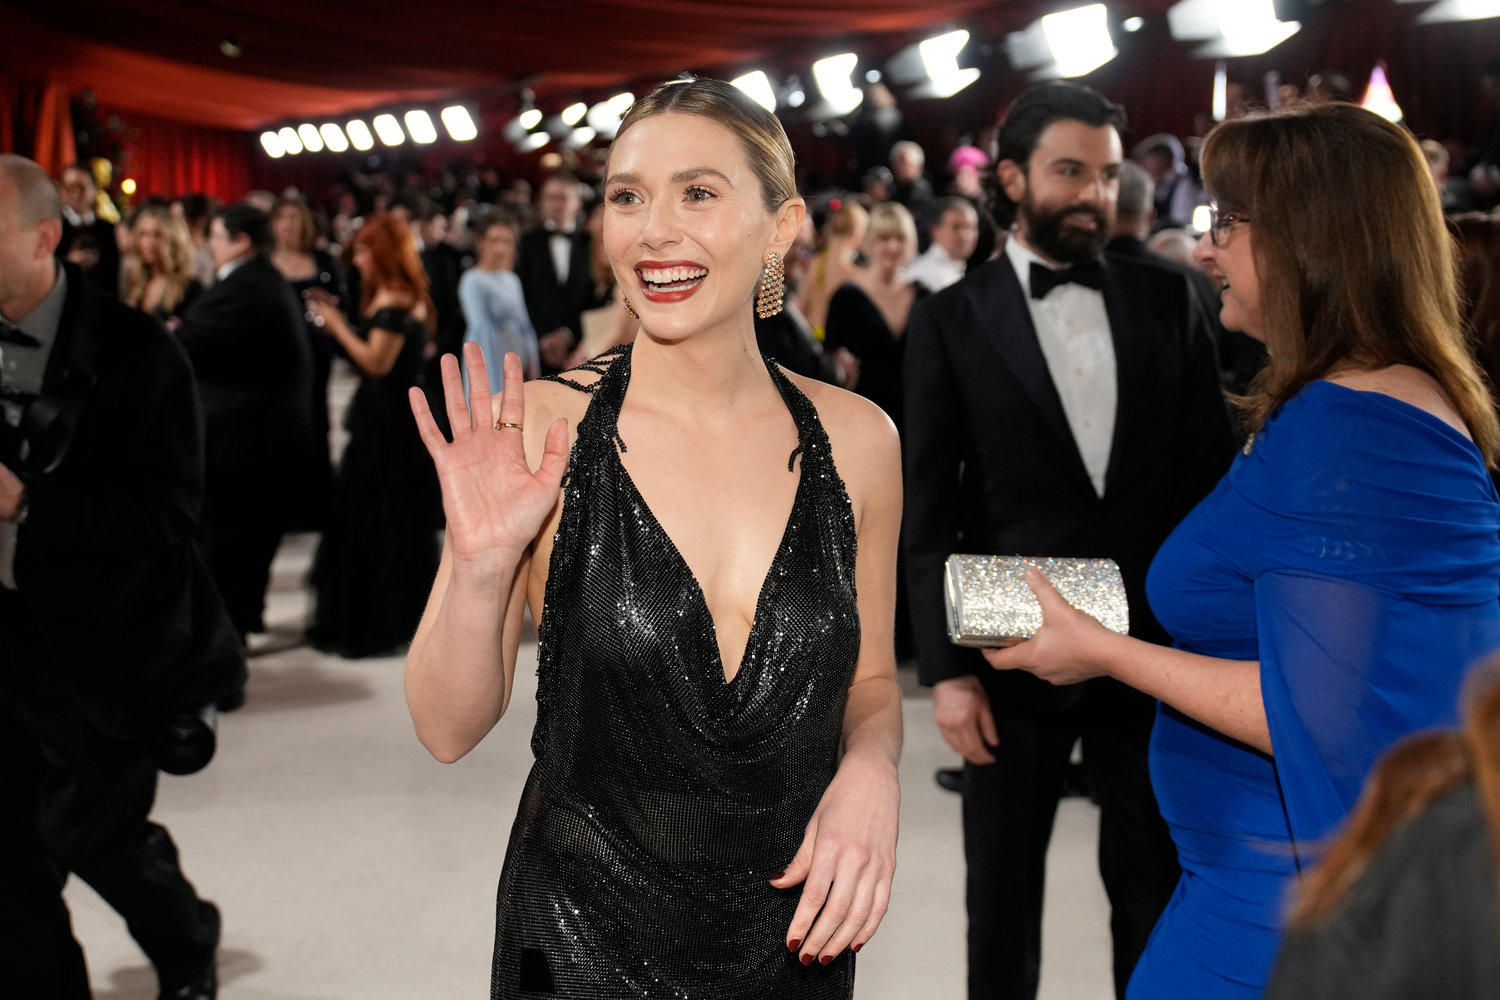 Elizabeth Olsen arrives at the Oscars on Sunday, March 12, 2023, at the Dolby Theatre in Los Angeles. (AP Photo/John Locher)